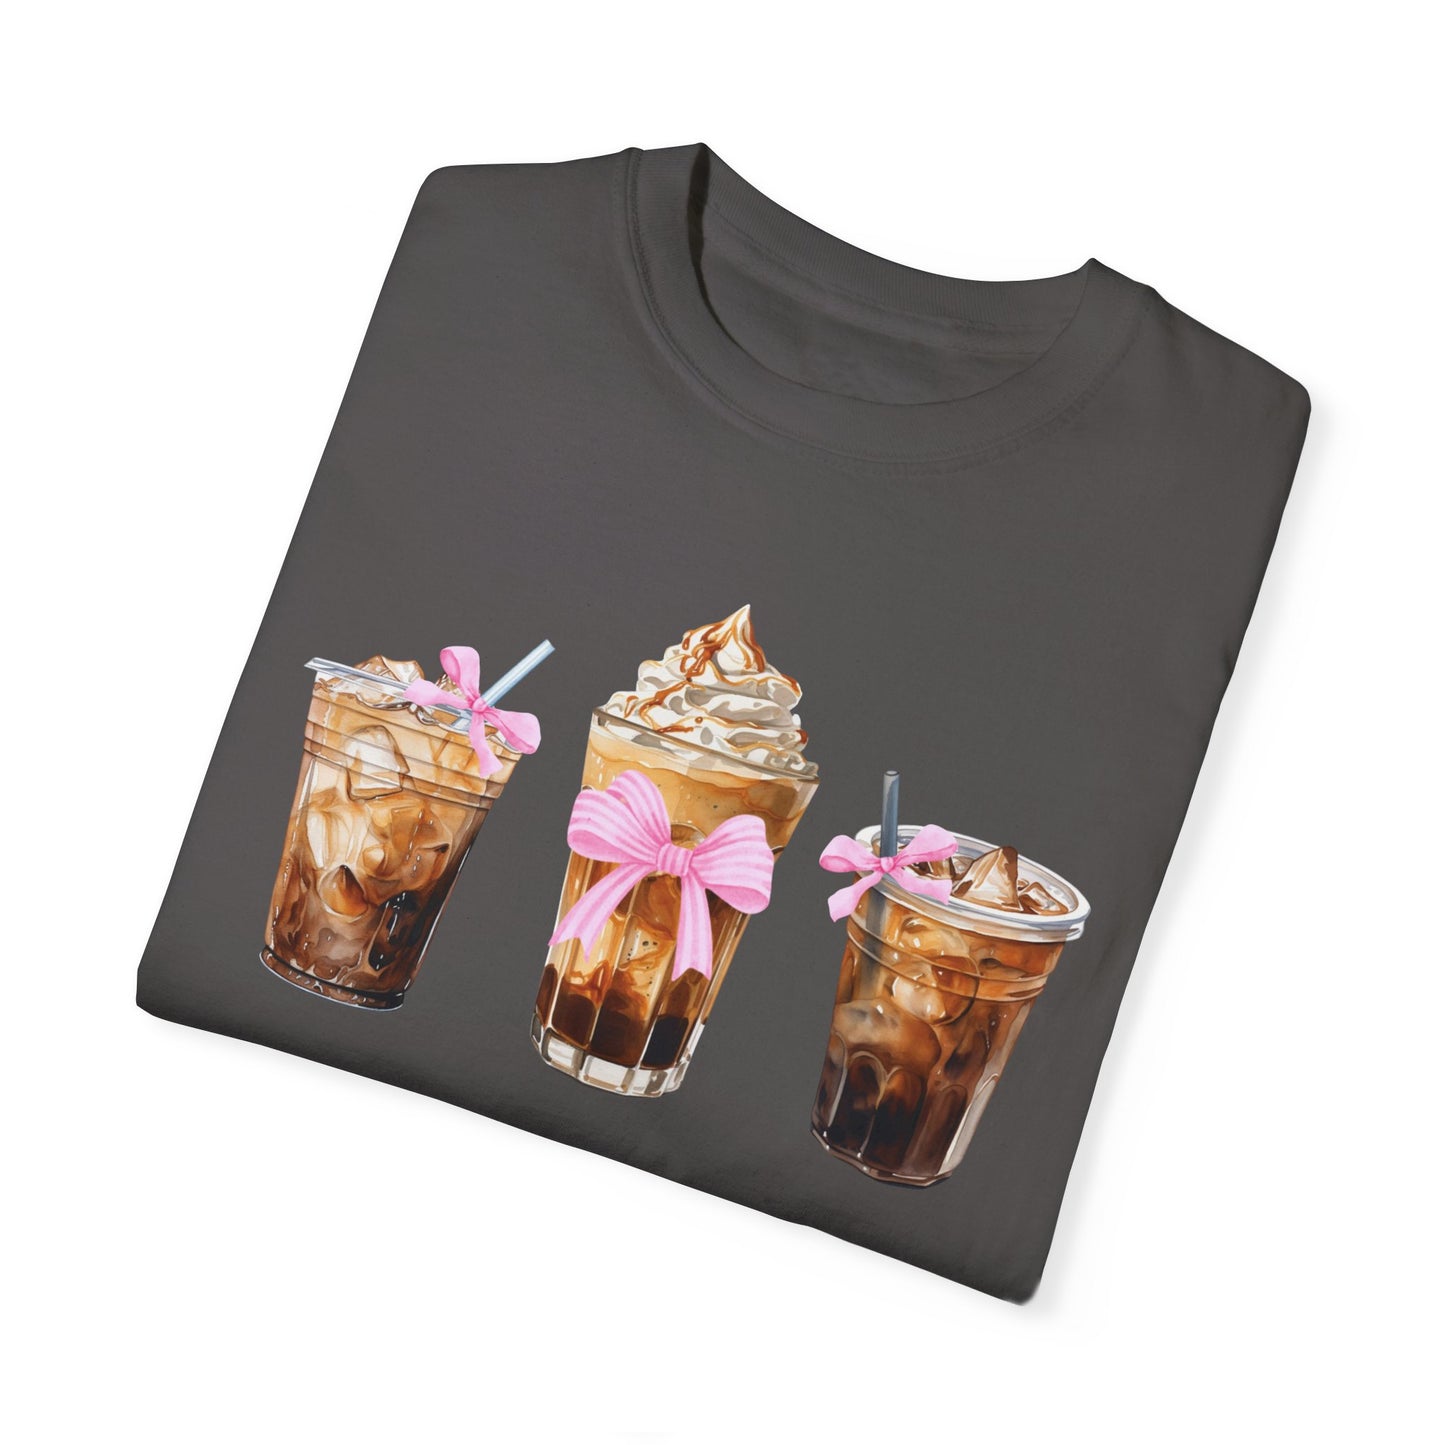 Coquette Iced Coffee Comfort Colors Tshirt